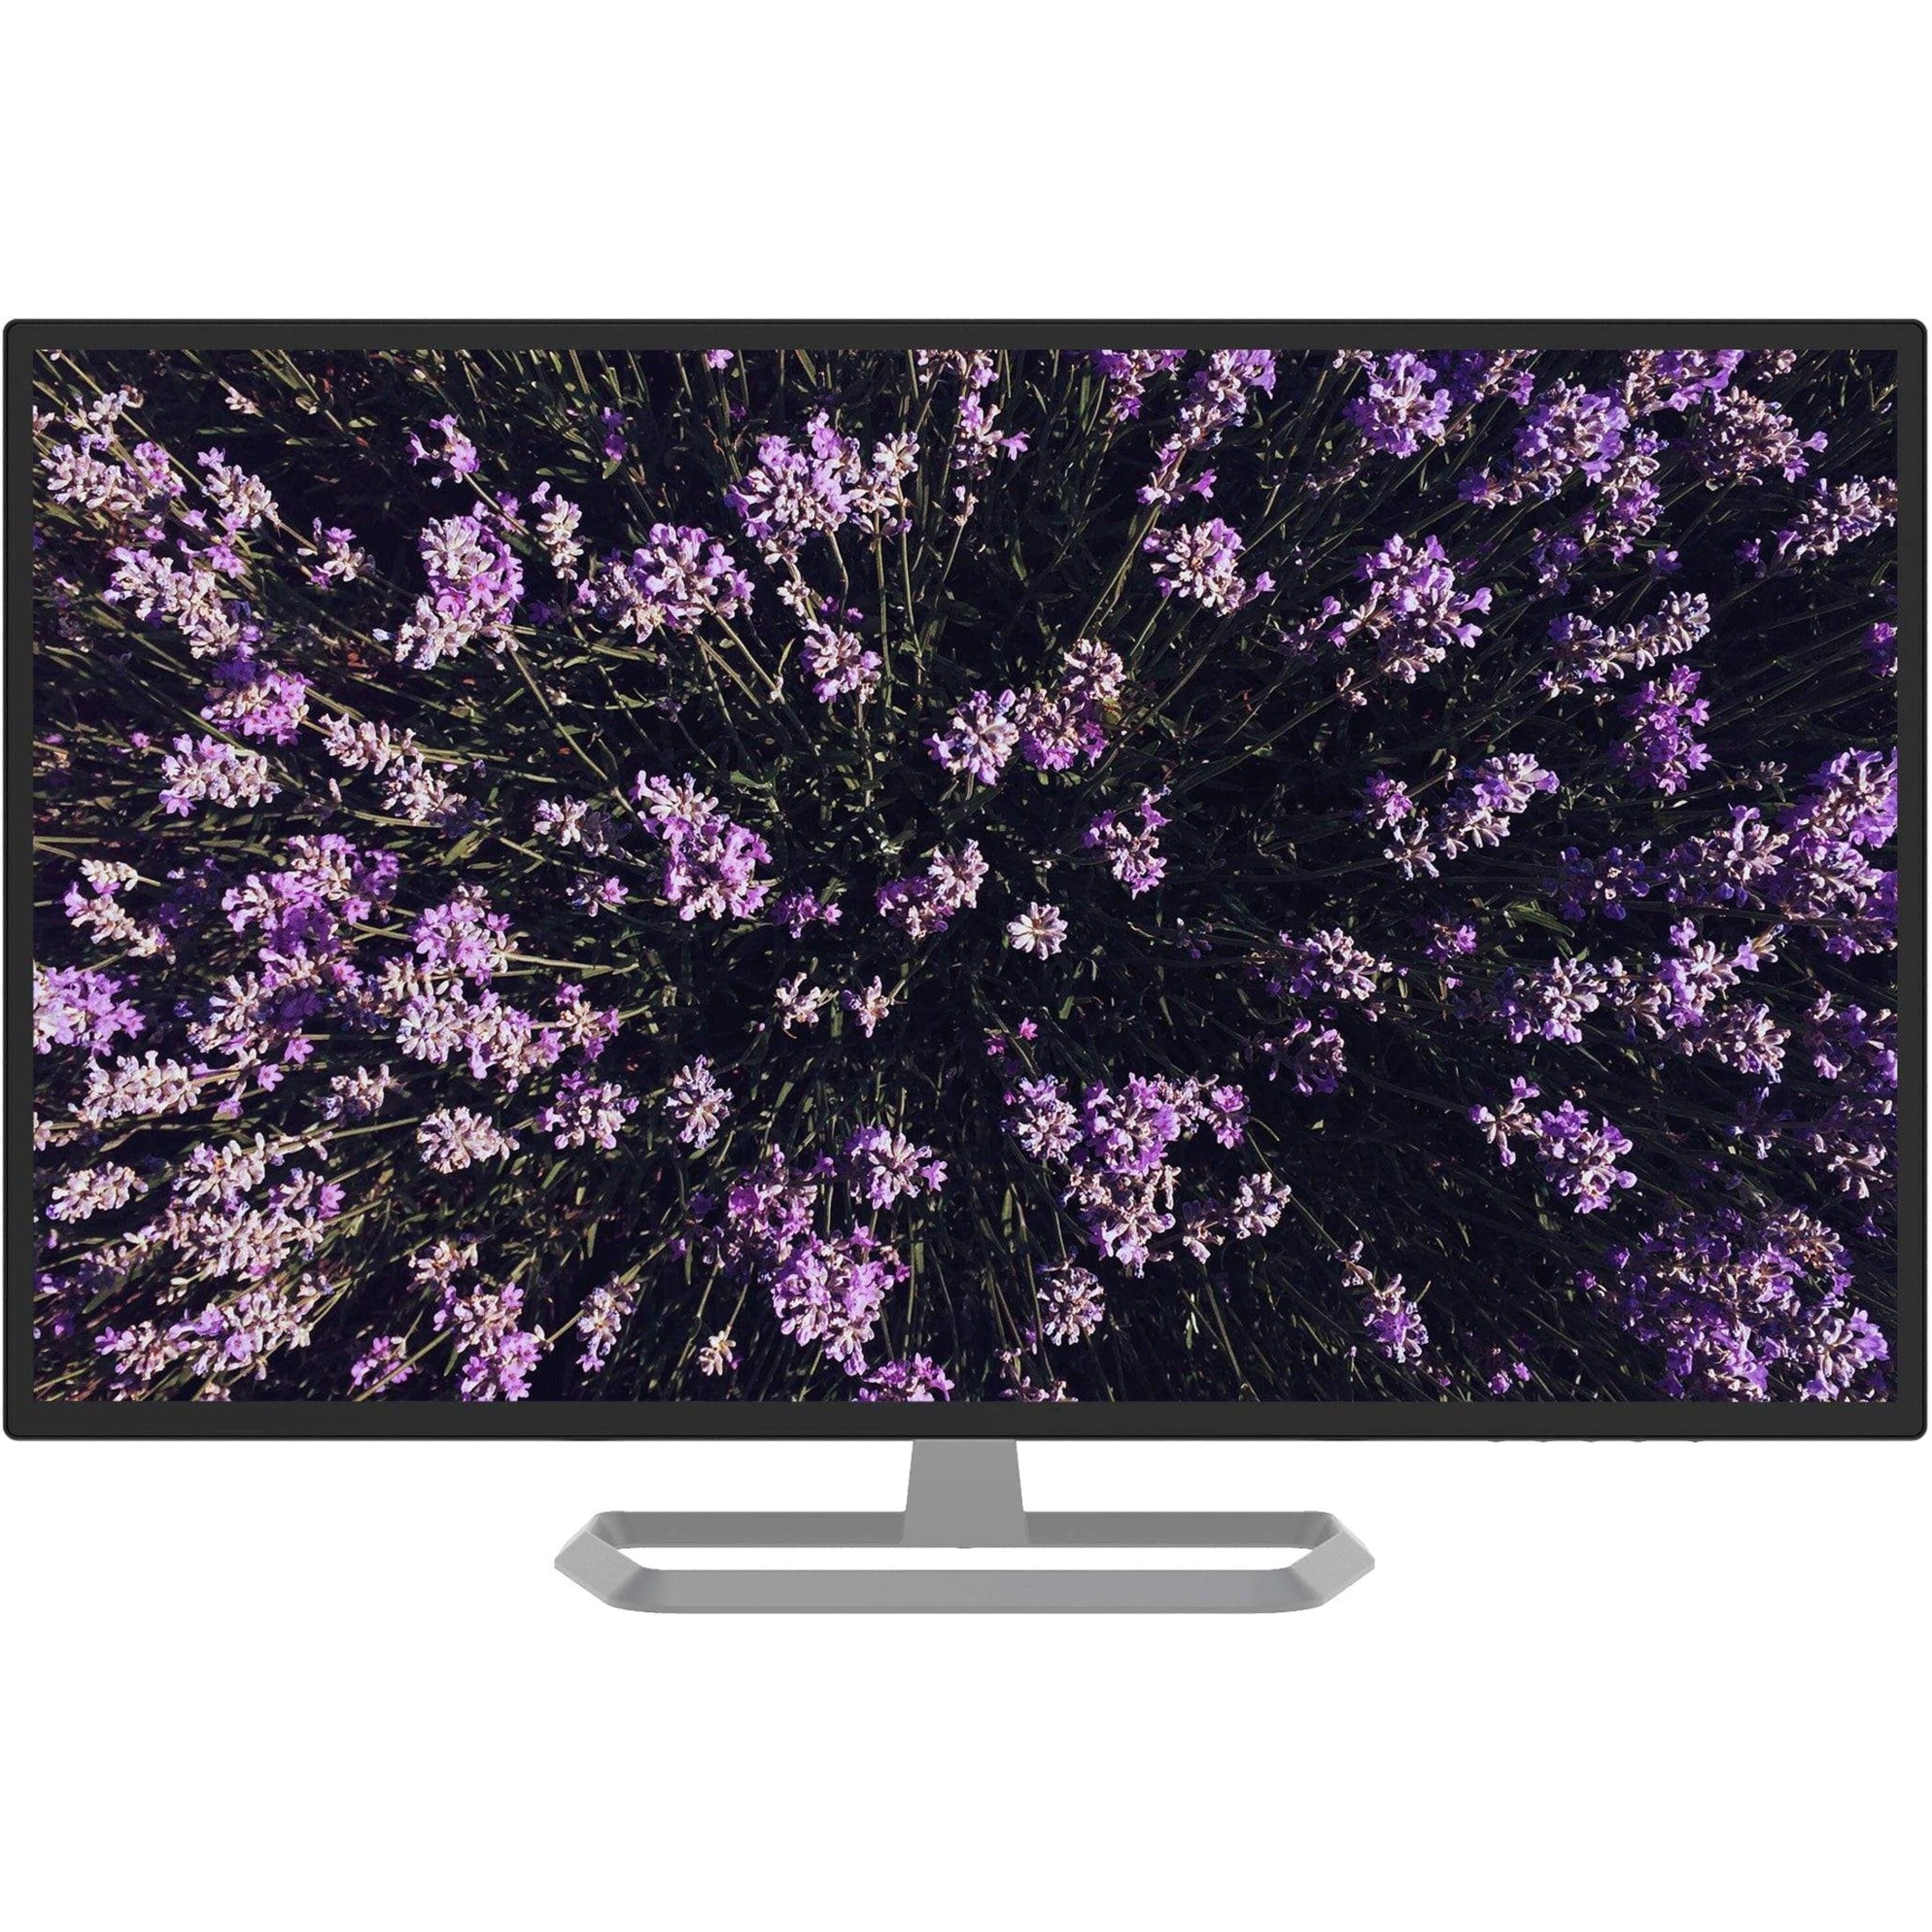 CTL MTX3200 X3200 32 WQHD LCD Monitor, Wide Viewing Angle, 2560 x 1440 Resolution, 16:9 Aspect Ratio